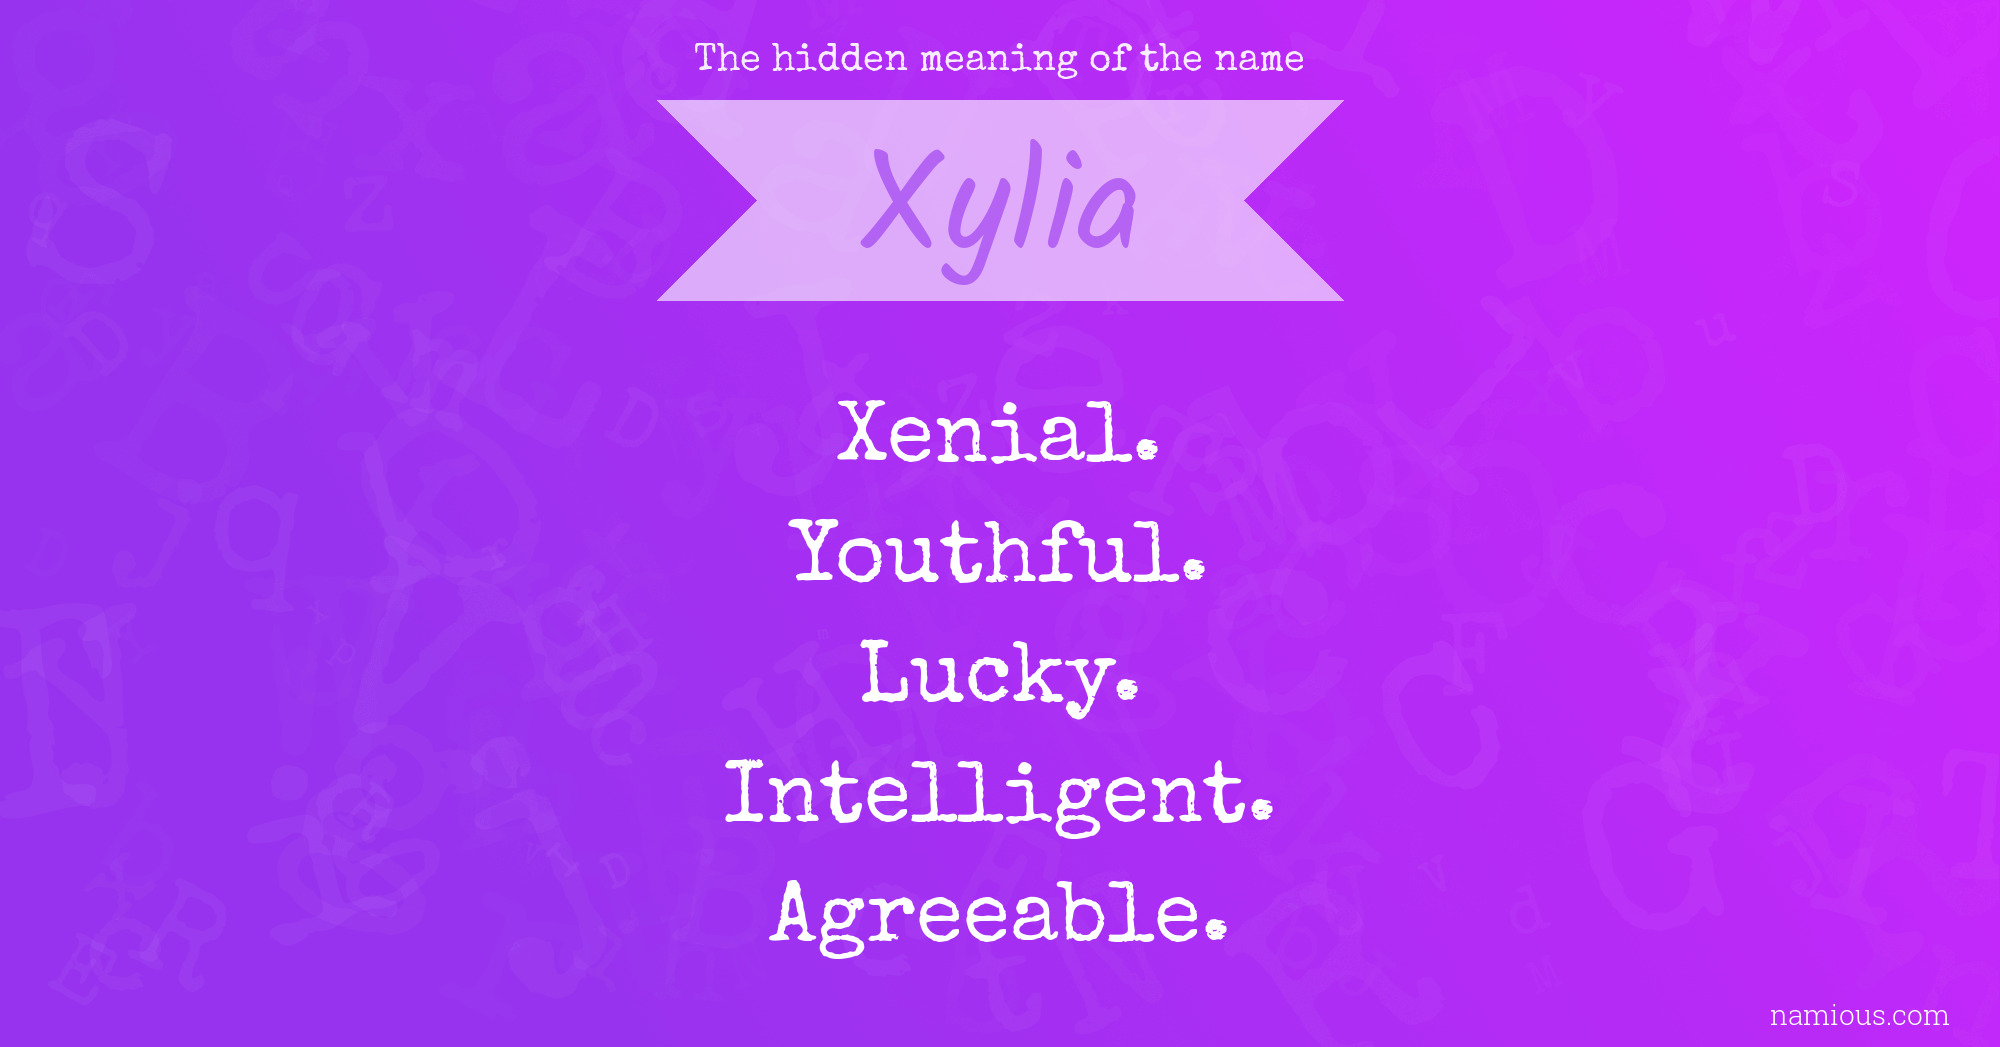 The hidden meaning of the name Xylia